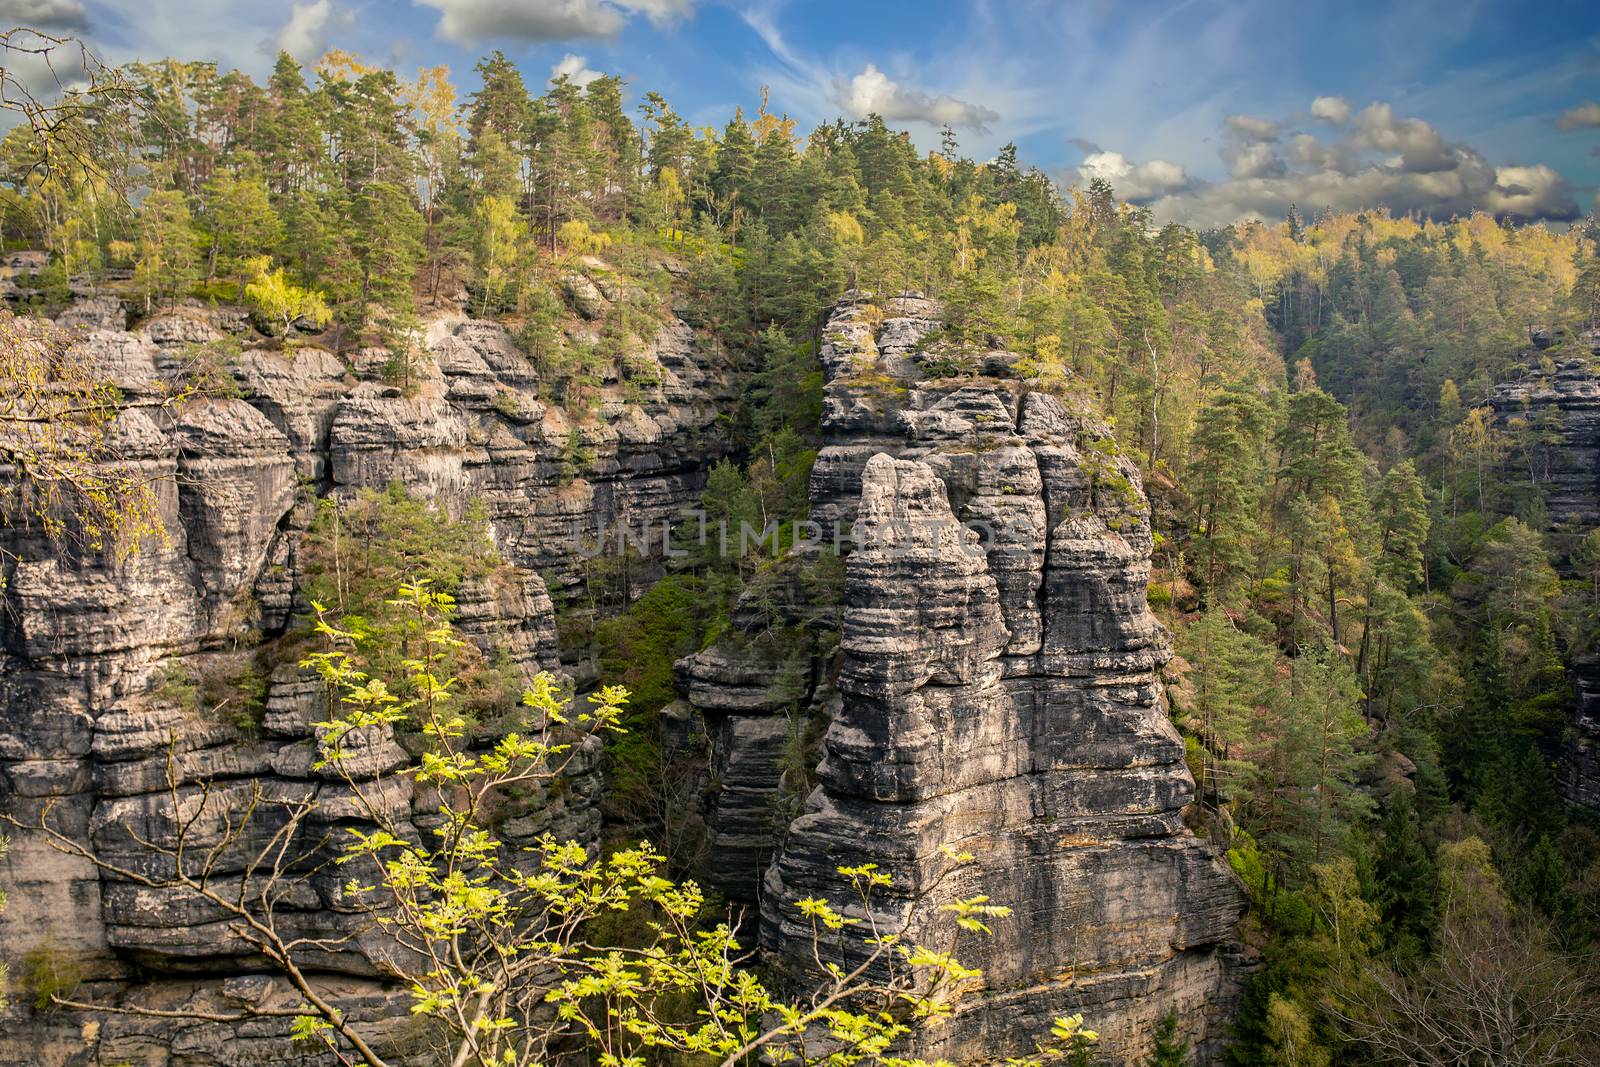 The Elbe Sandstone Mountains are a sandstone massif on the upper reaches of the Elbe River in Germany and the Czech Republic. Czech Bohemia or Saxony in Germany.